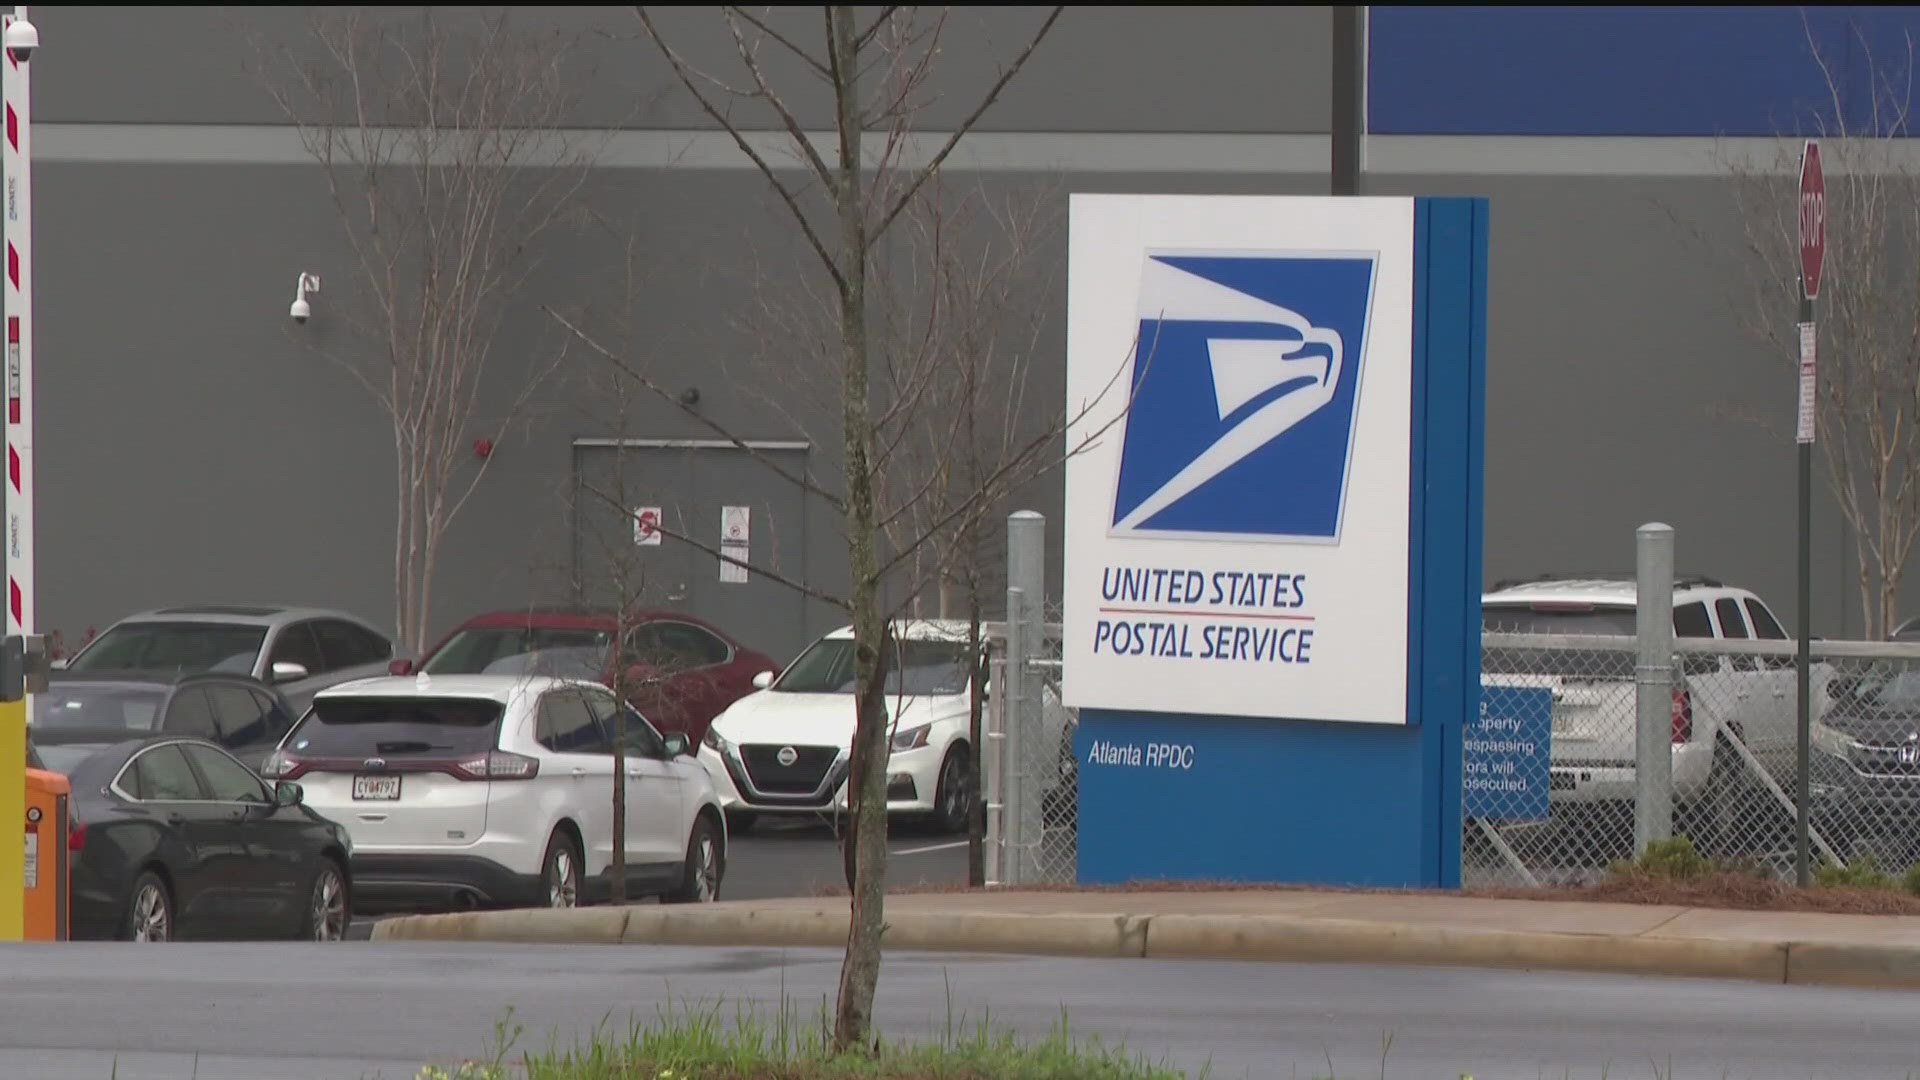 Postal Service said in a letter to the secretary of state its intensifying resources in the region.